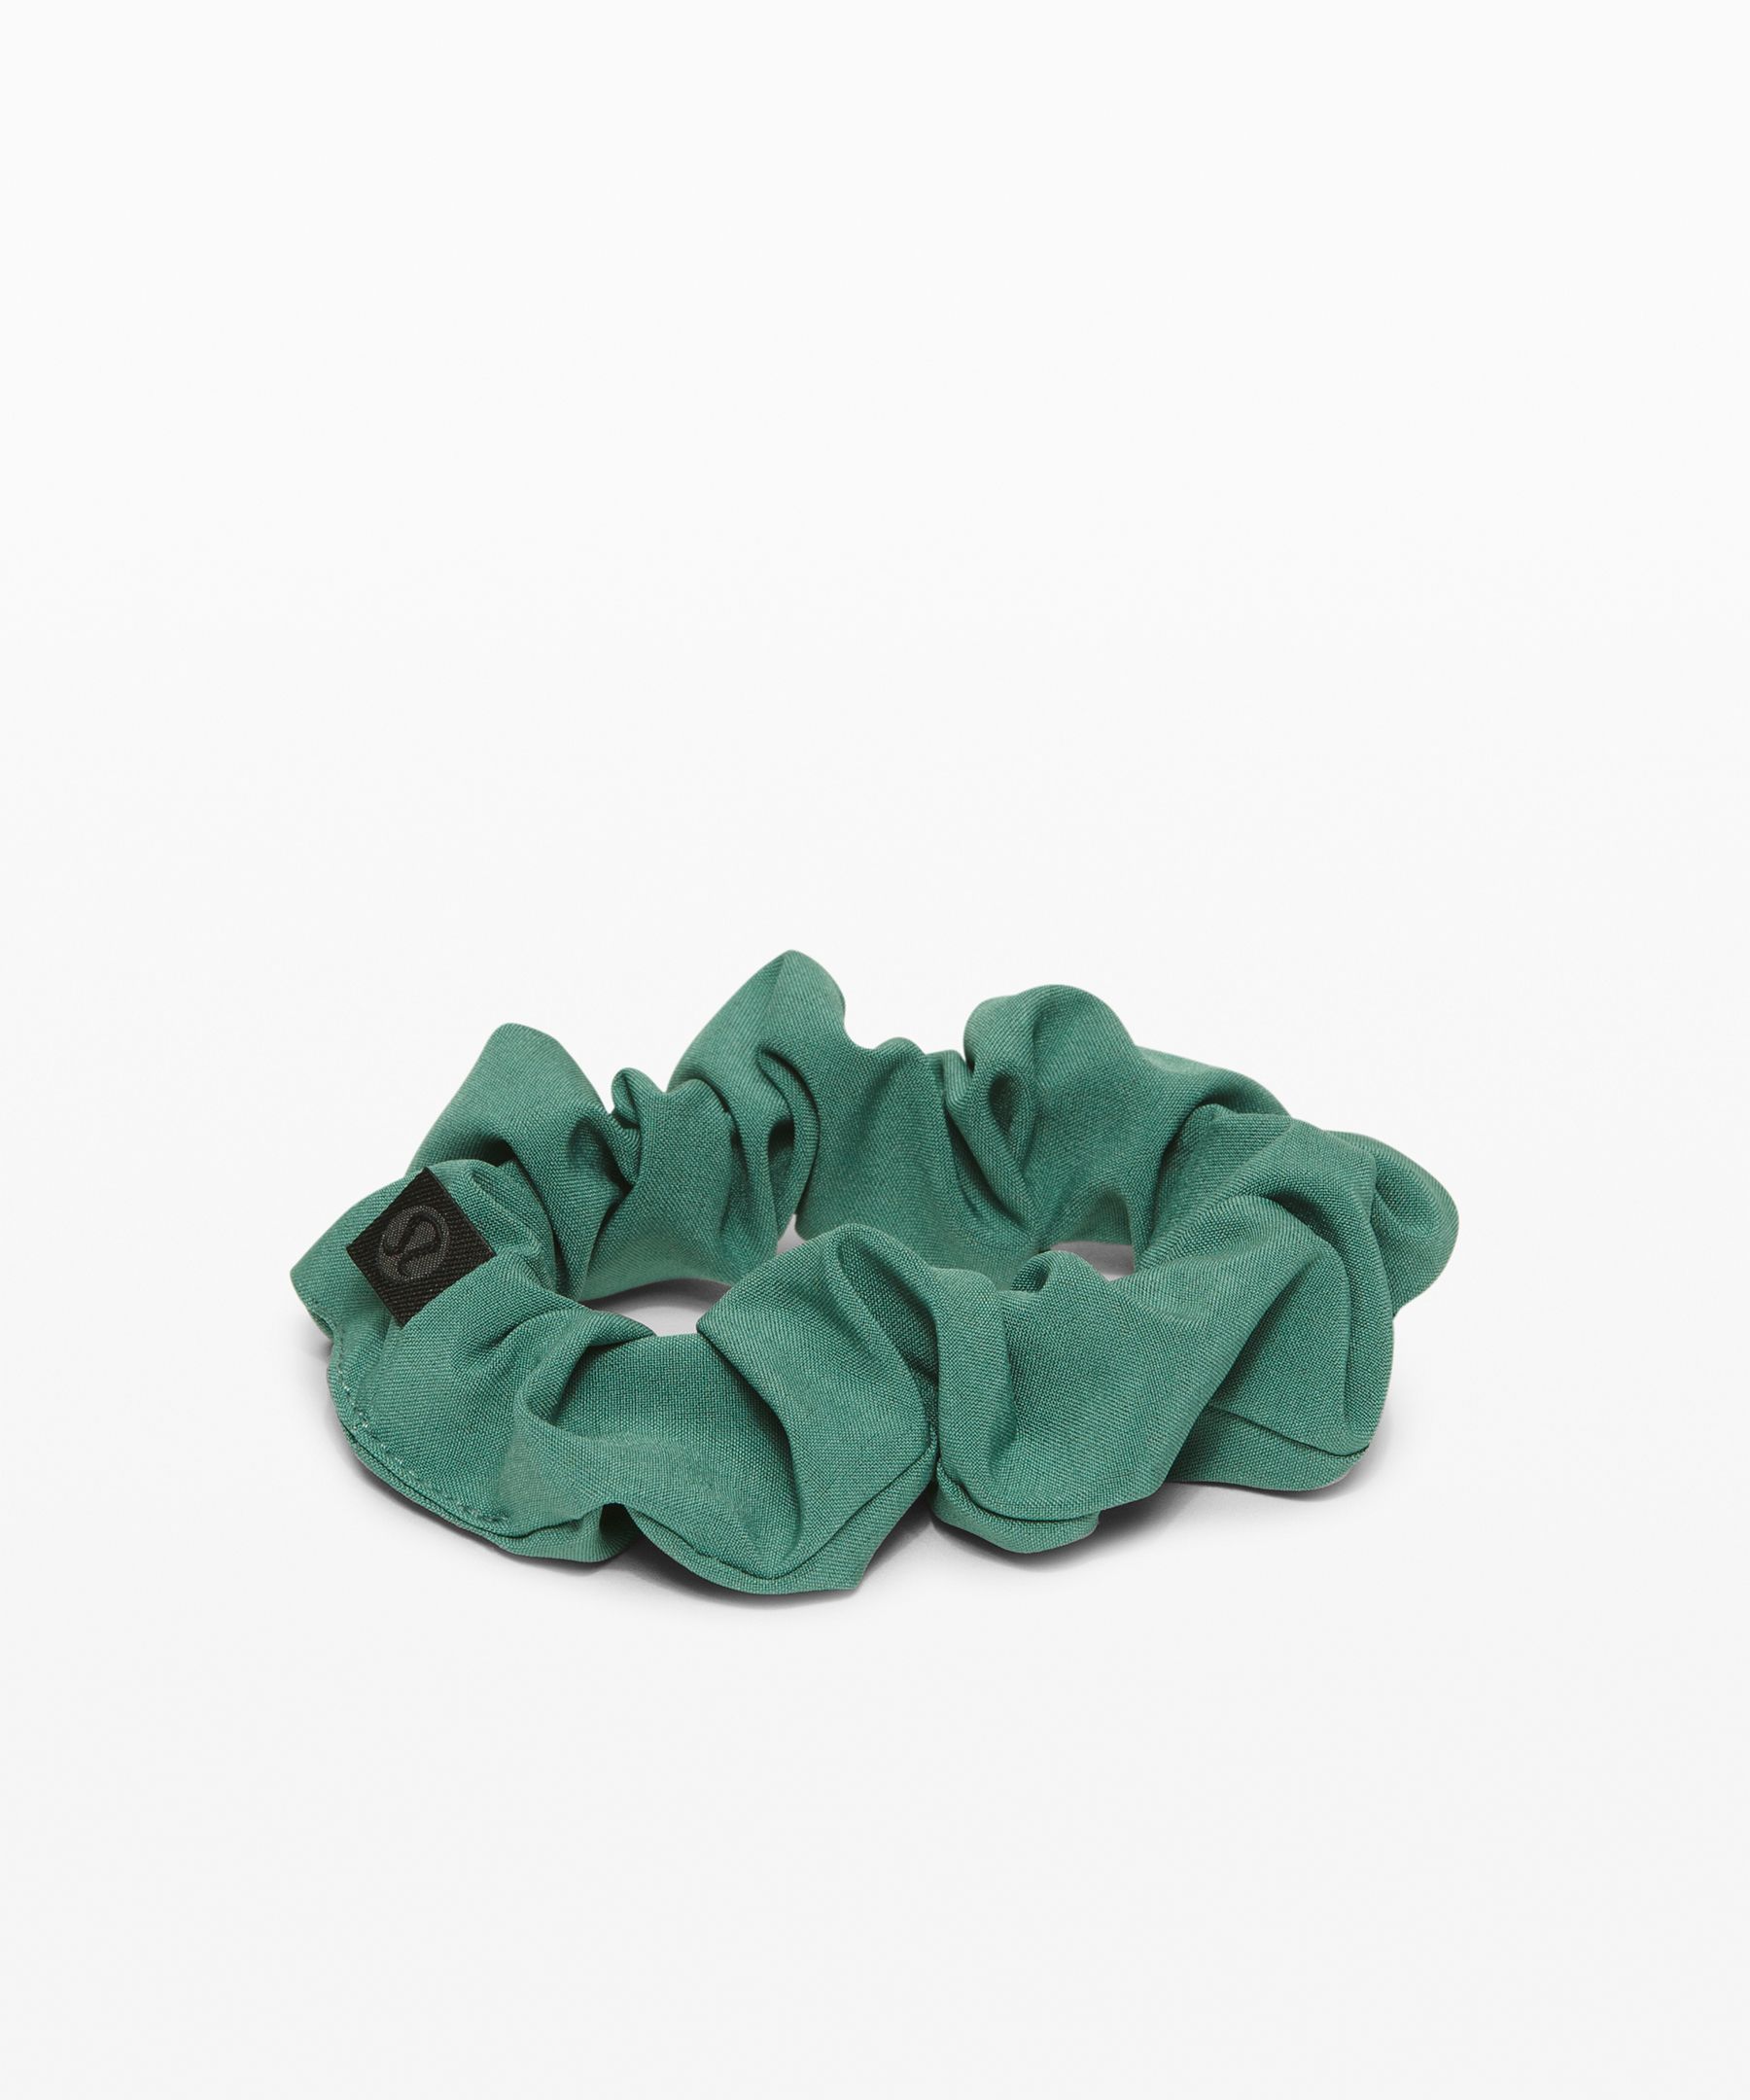 Lululemon Uplifting Scrunchie In Frosted Pine